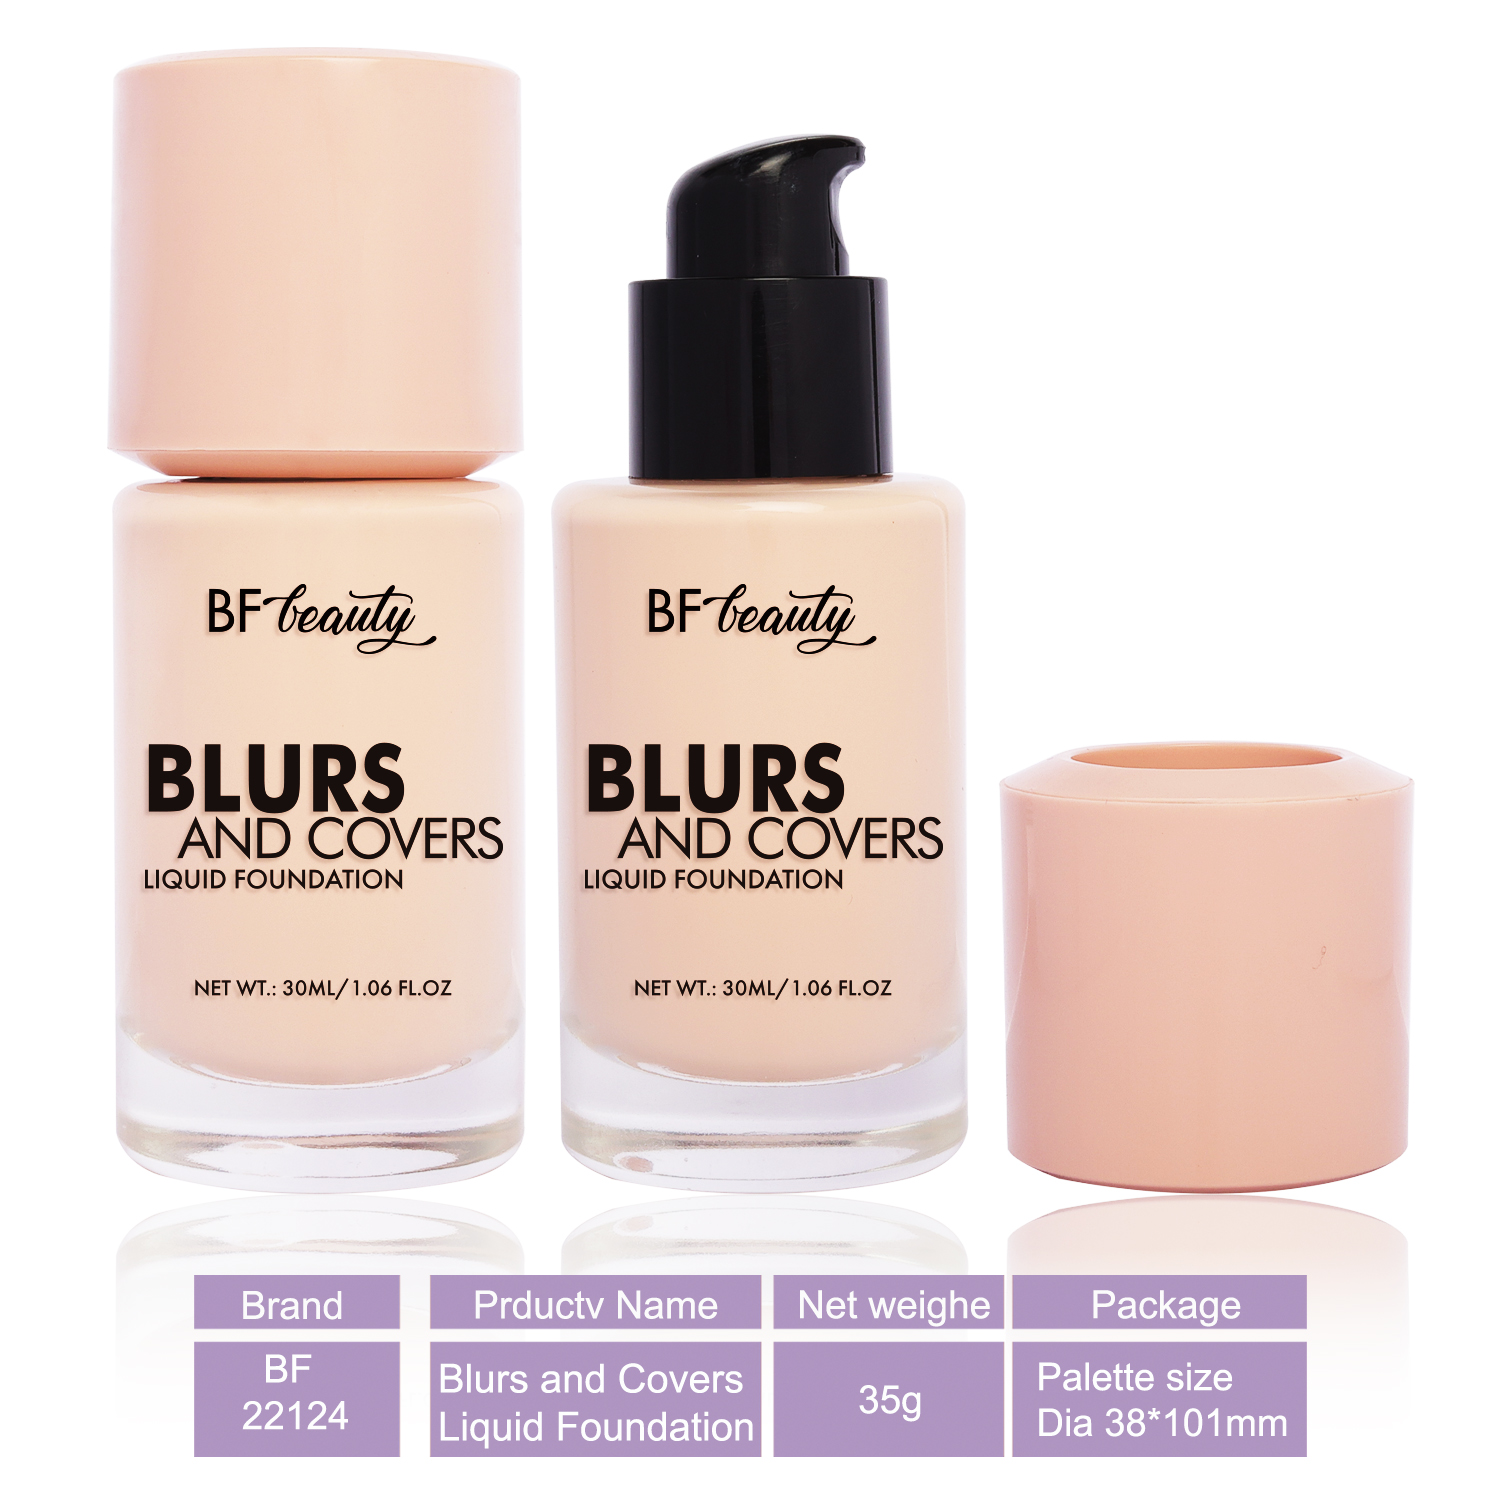 Blurs and Covers Liquid Foundation